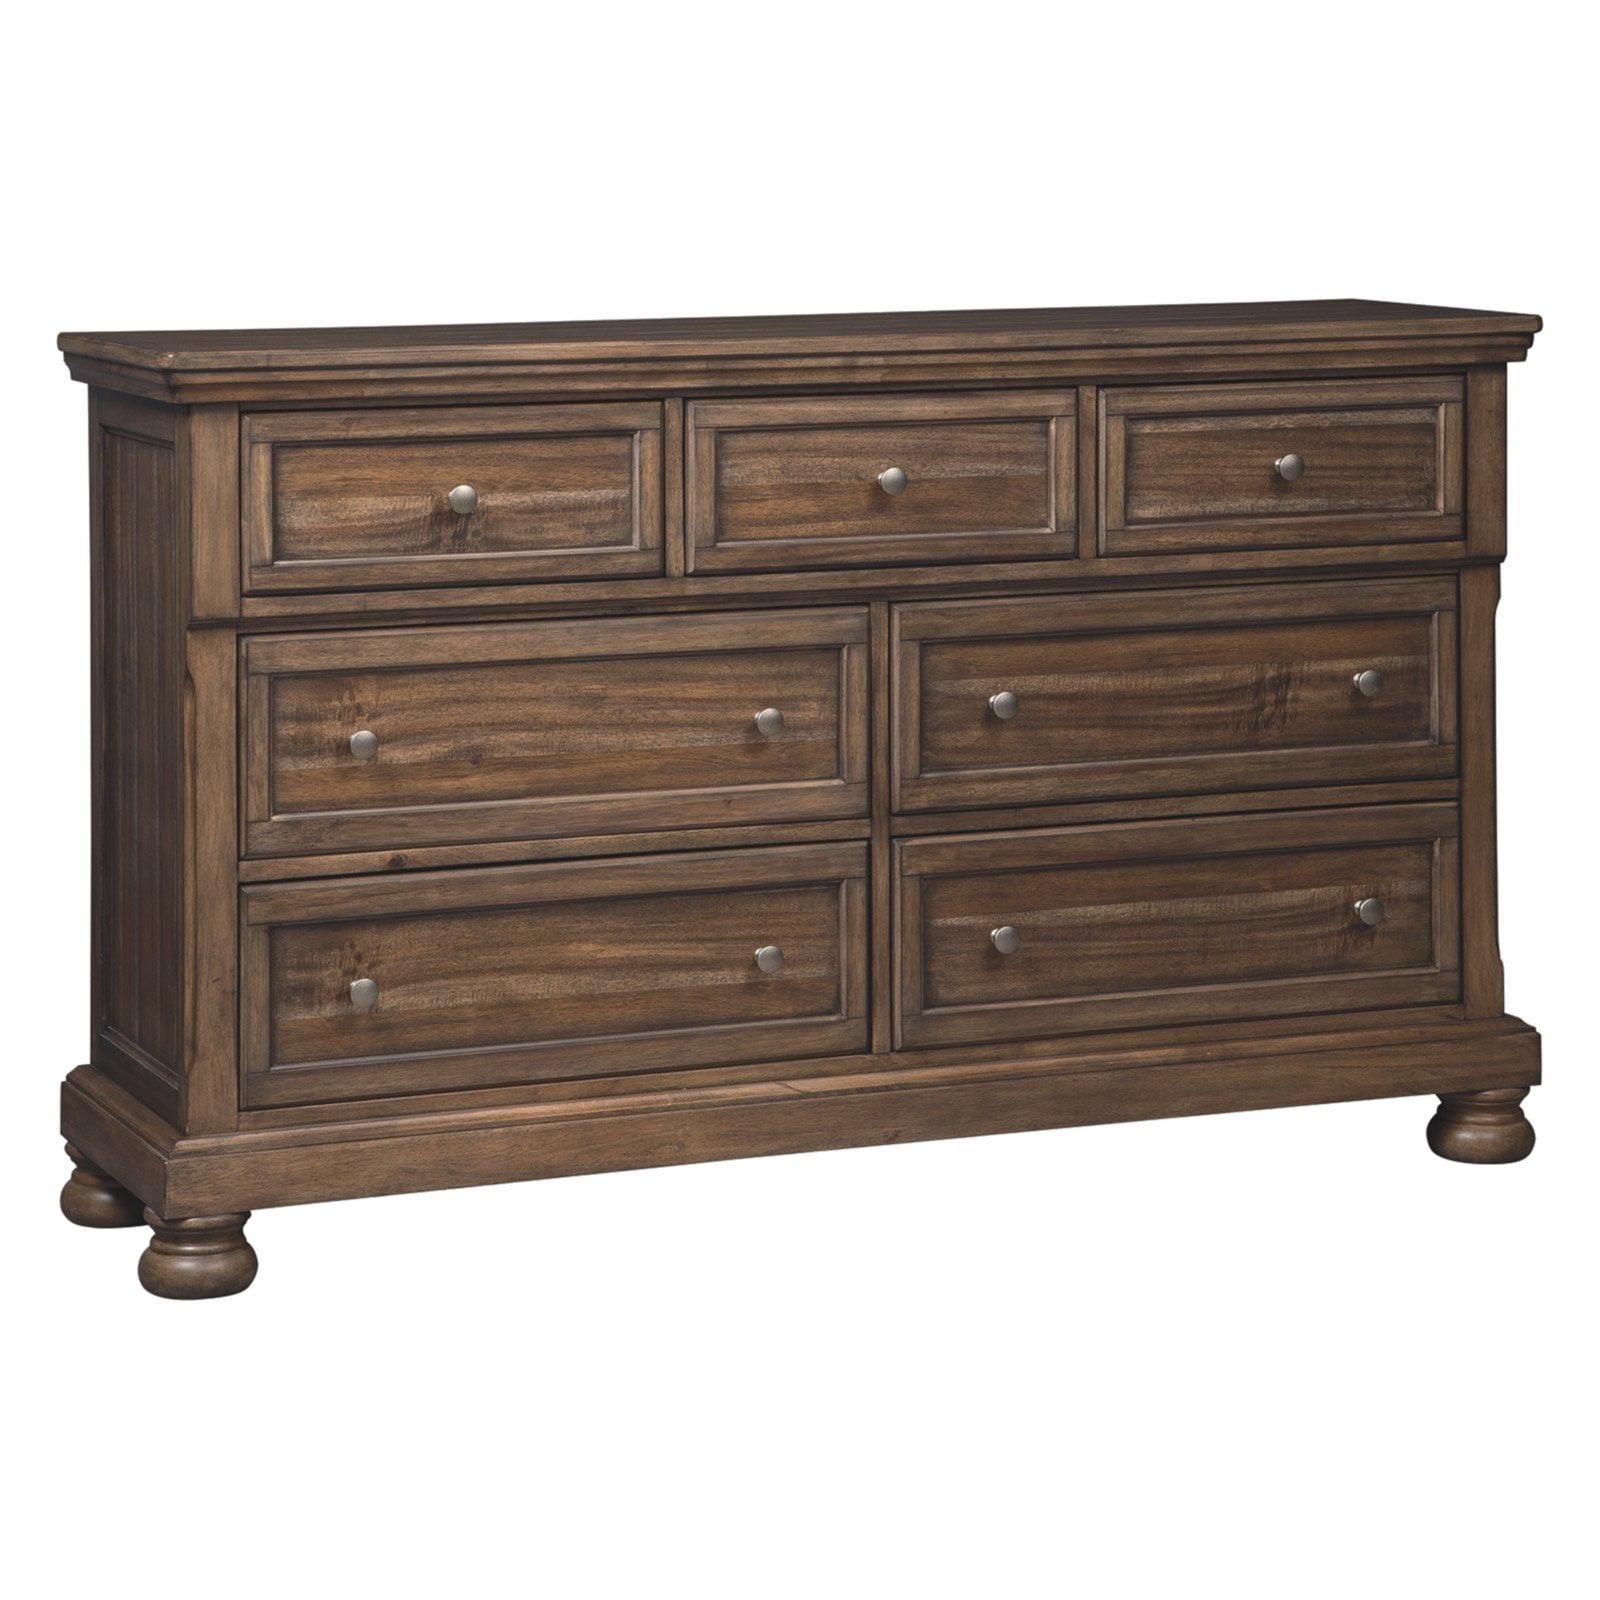 Traditional Tobacco Brown Dresser with Aged Brass Knobs and Mirror